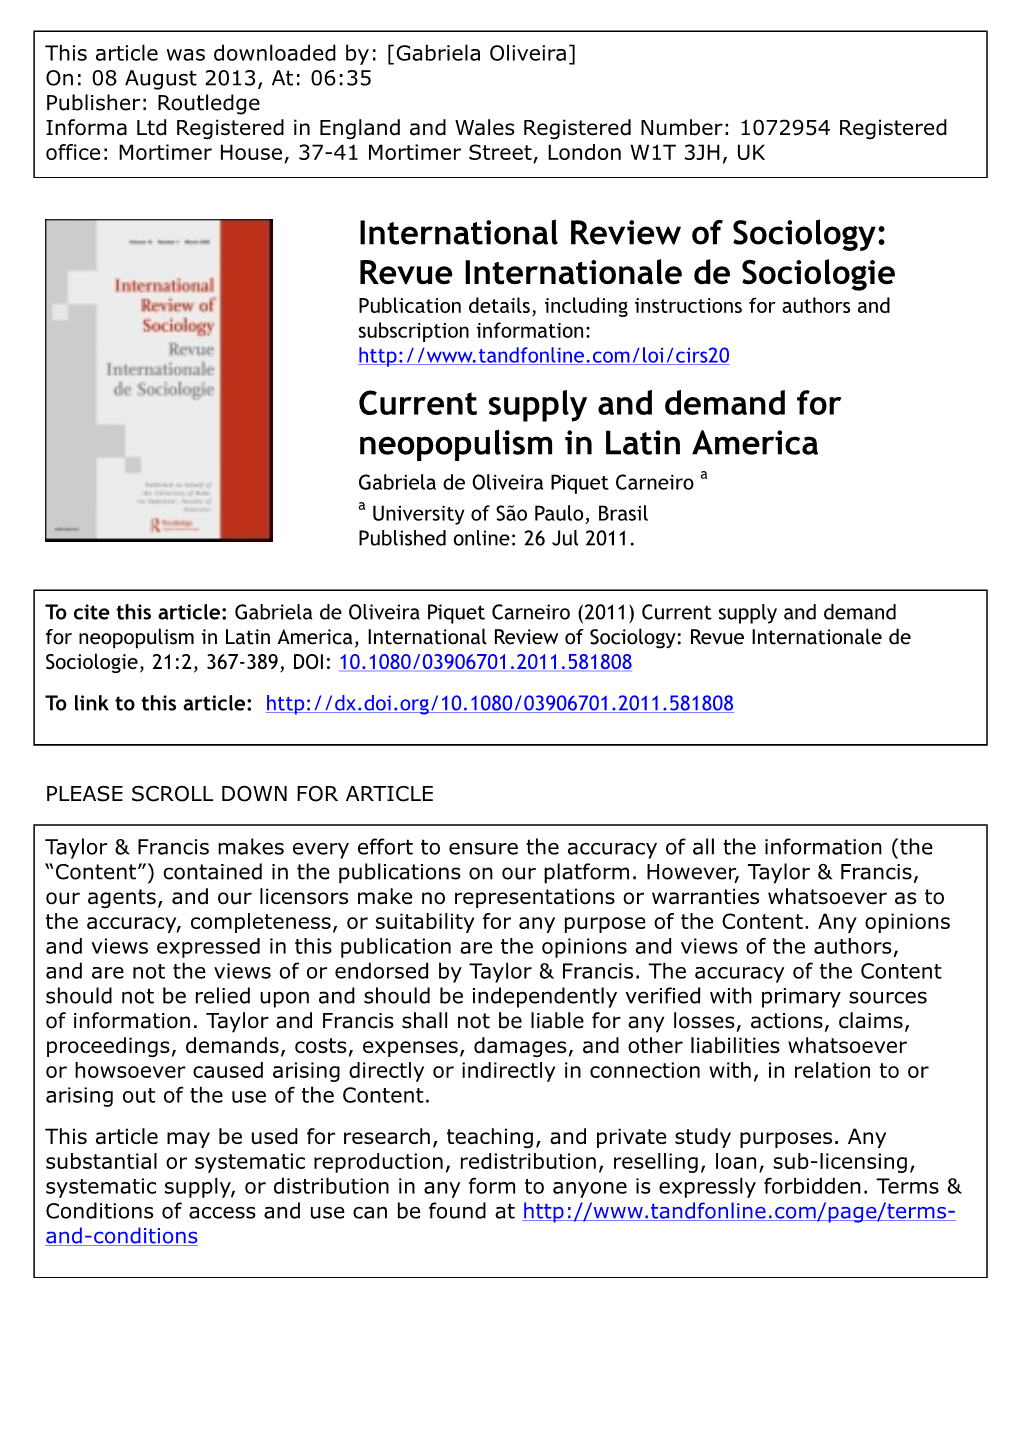 Current Supply and Demand for Neopopulism in Latin America Gabriela De Oliveira Piquet Carneiro a a University of São Paulo, Brasil Published Online: 26 Jul 2011